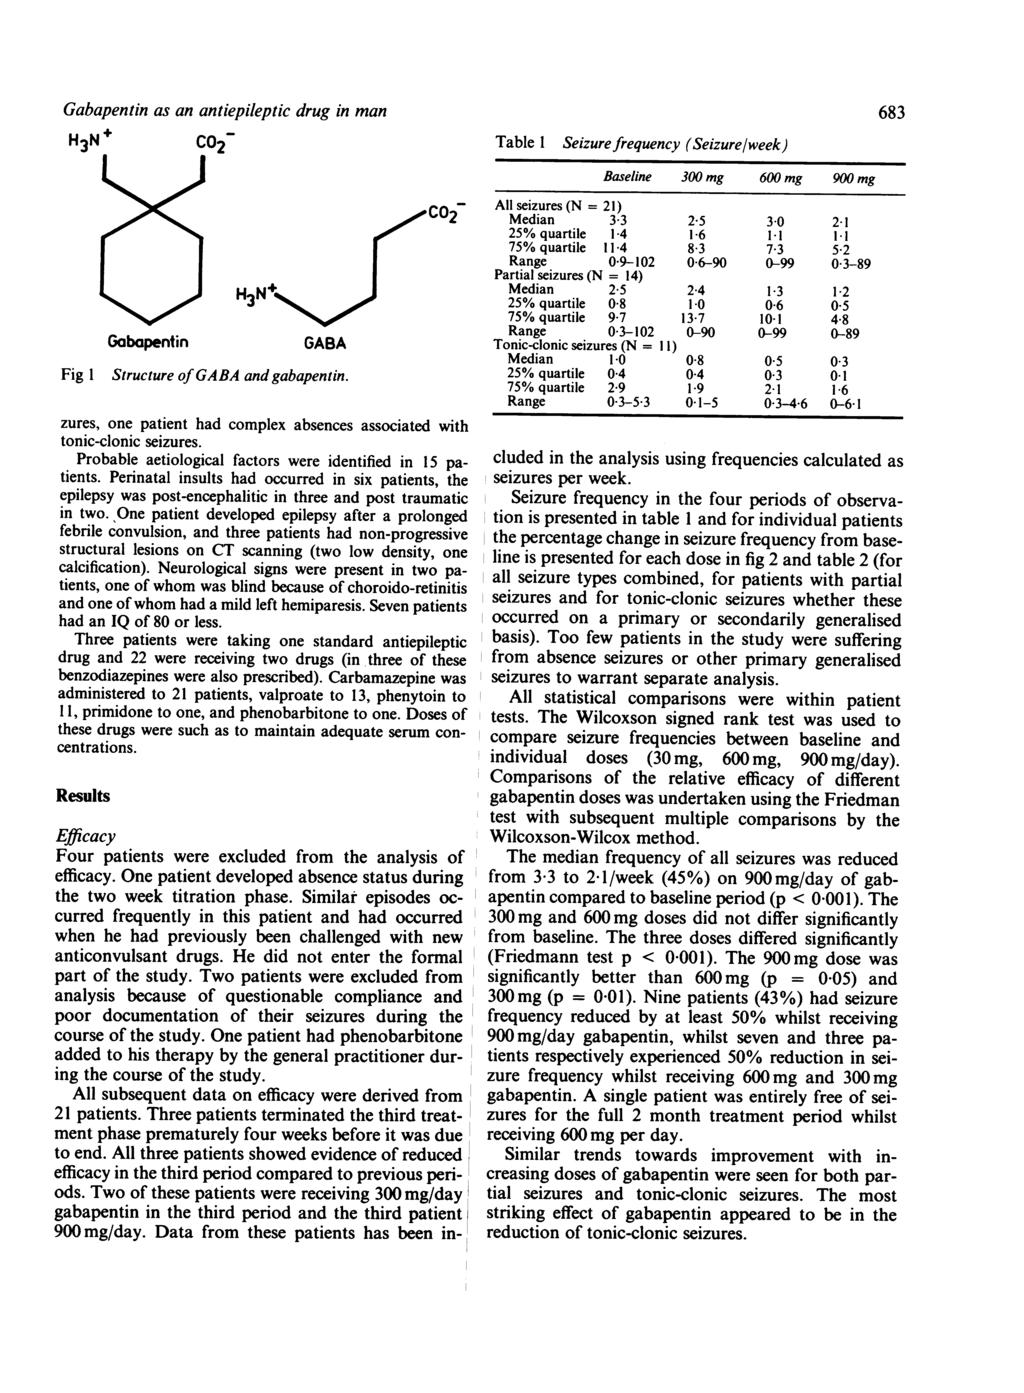 Gabapentin as an antiepileptic drug in man H3N + Co2- Fig 1 Gabopentin GABA Structure of GABA and gabapentin. zures, one patient had complex absences associated with tonic-clonic seizures.